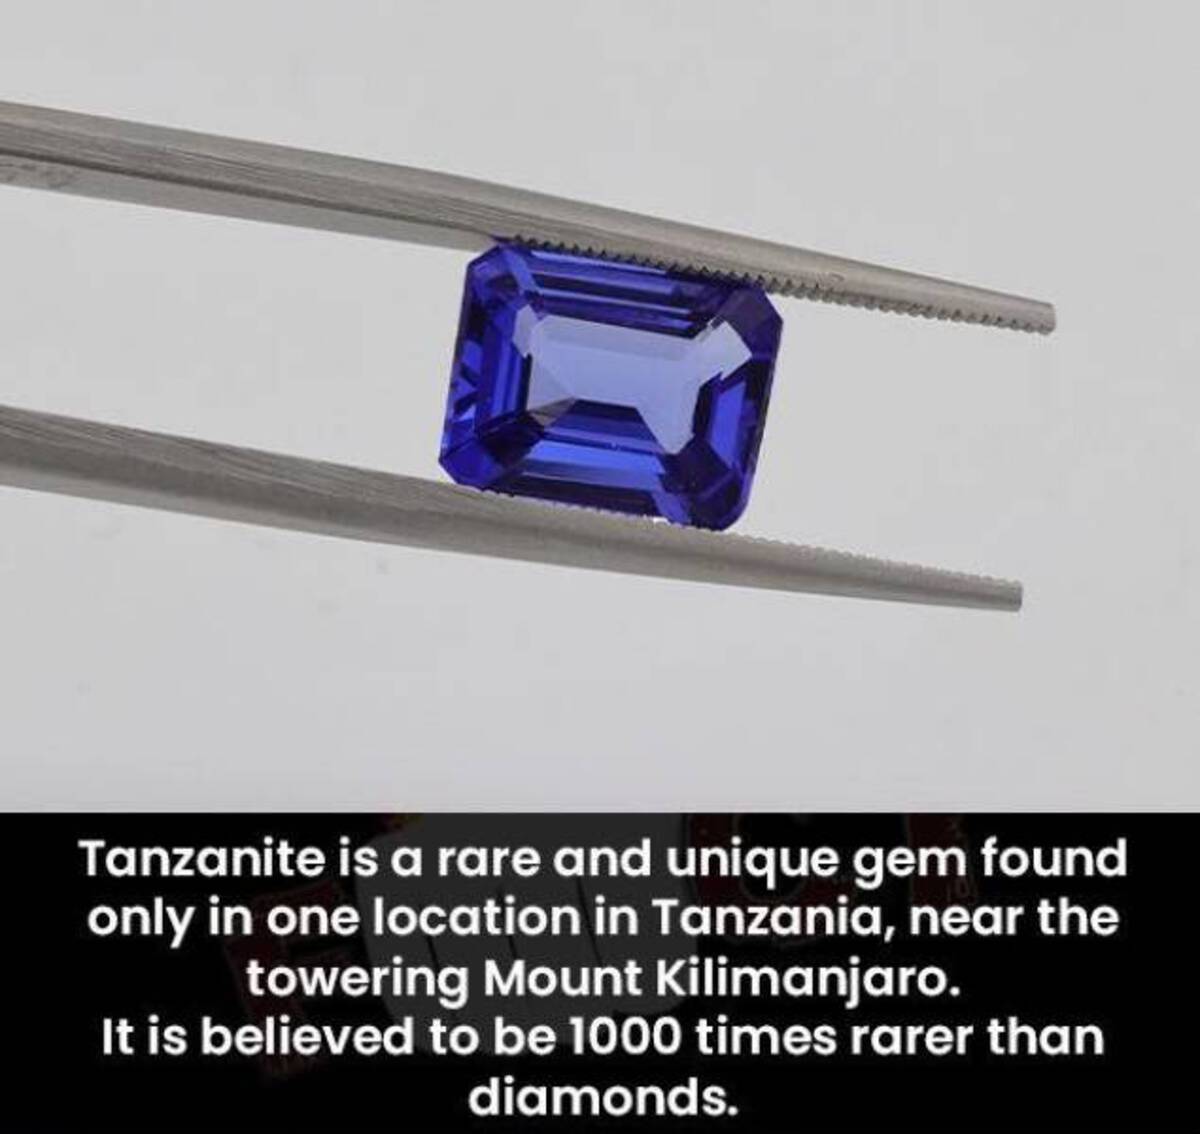 Tanzanite is a rare and unique gem found only in one location in Tanzania, near the towering Mount Kilimanjaro. It is believed to be 1000 times rarer than diamonds.